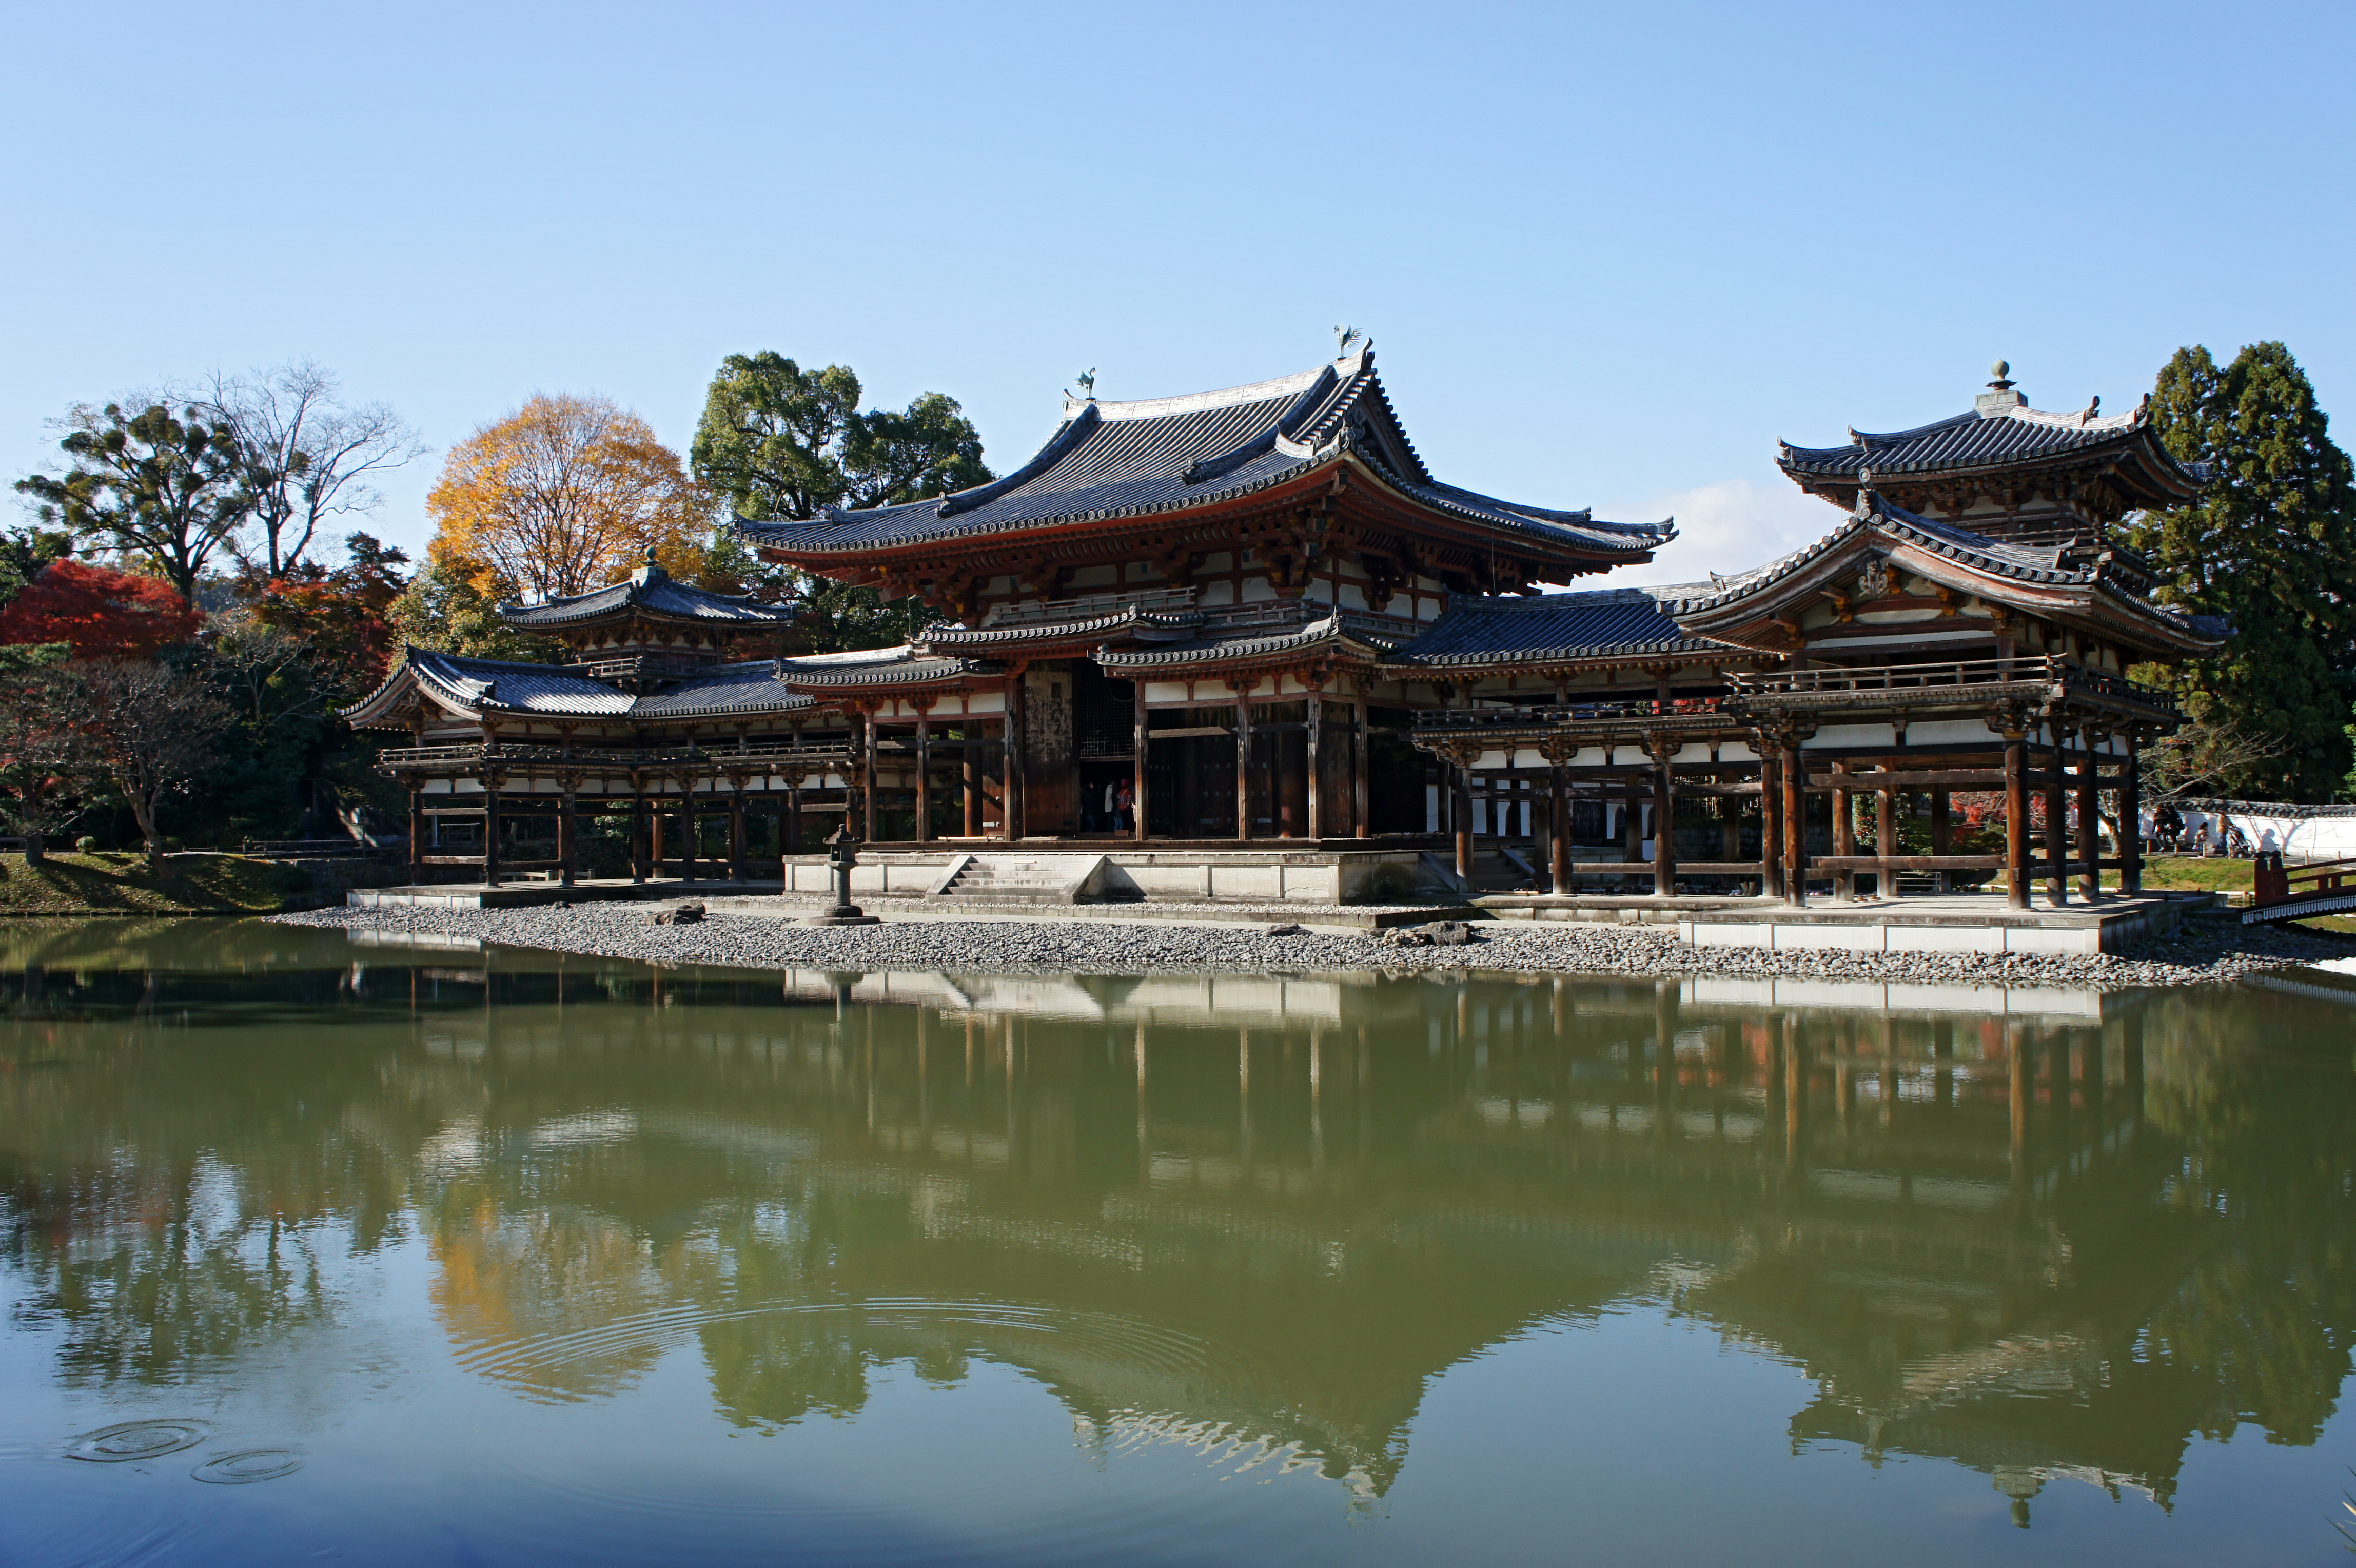 Byodo-in's Phoenix Hall is a Japan's National Treasure in Uji, Kyoto prefecture, Japan. It was built in 1153 CE. Byodo-in was registered as part of the UNESCO World Heritage Site "Historic monuments of ancient Kyoto." (CC BY 2.5. Created: 27 November 2010.)